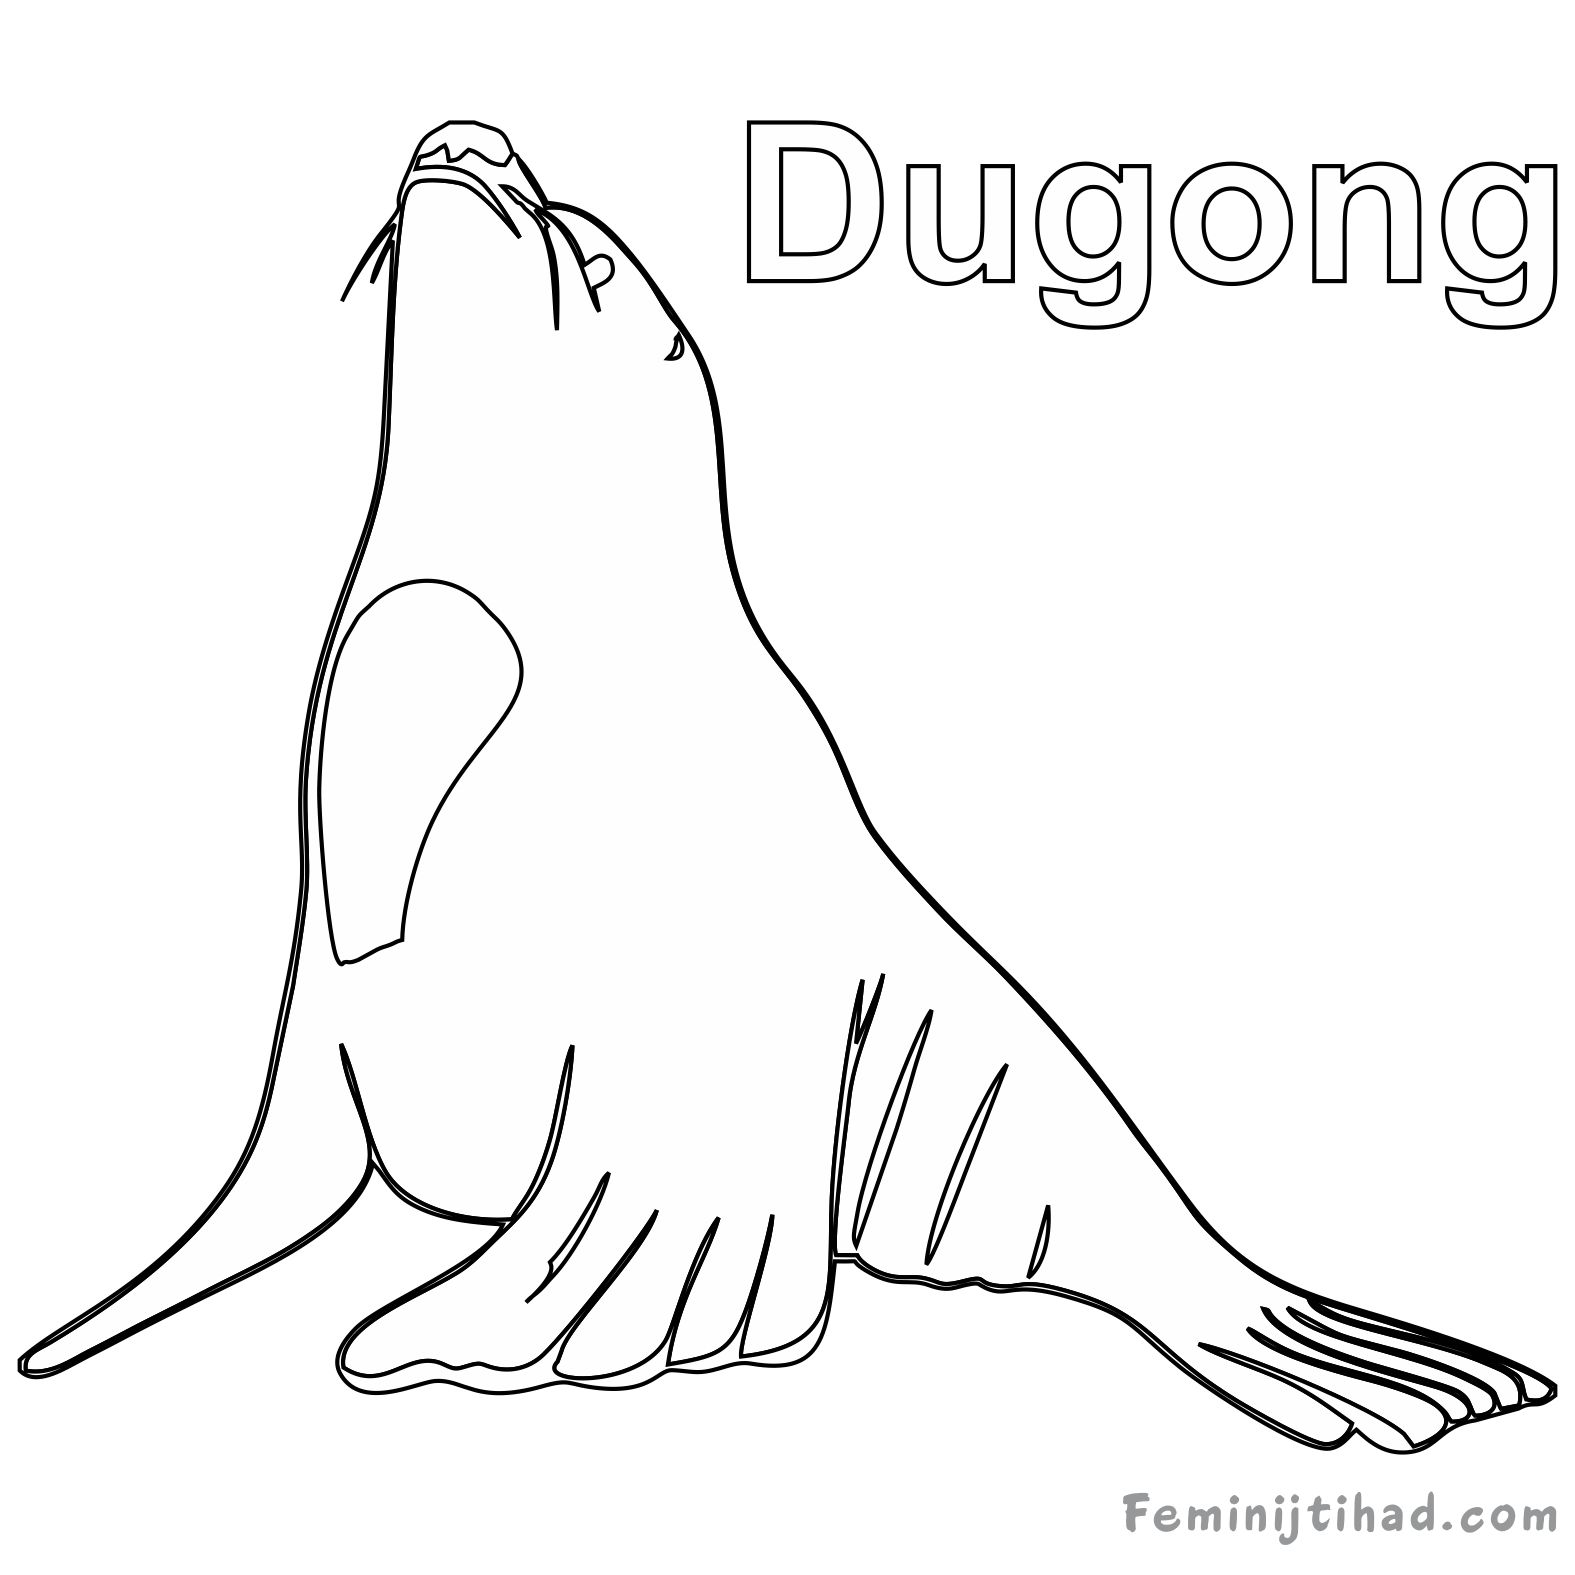 Coloring Page of Dugong